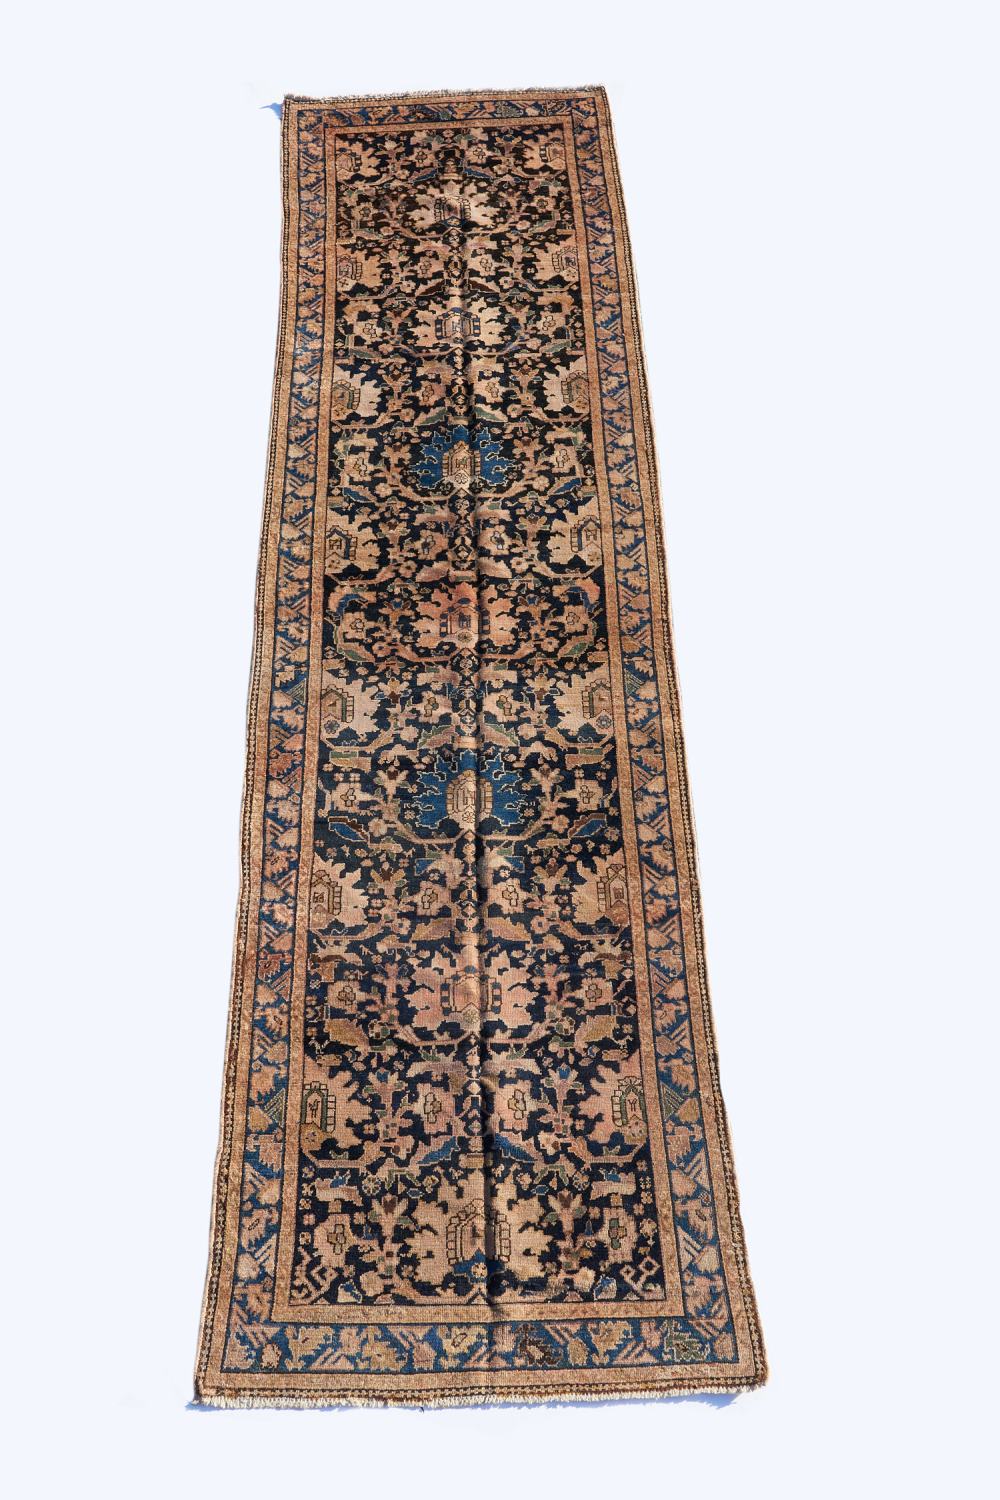 LARGE MALAYER RUNNER c 1900 West 2ce38e